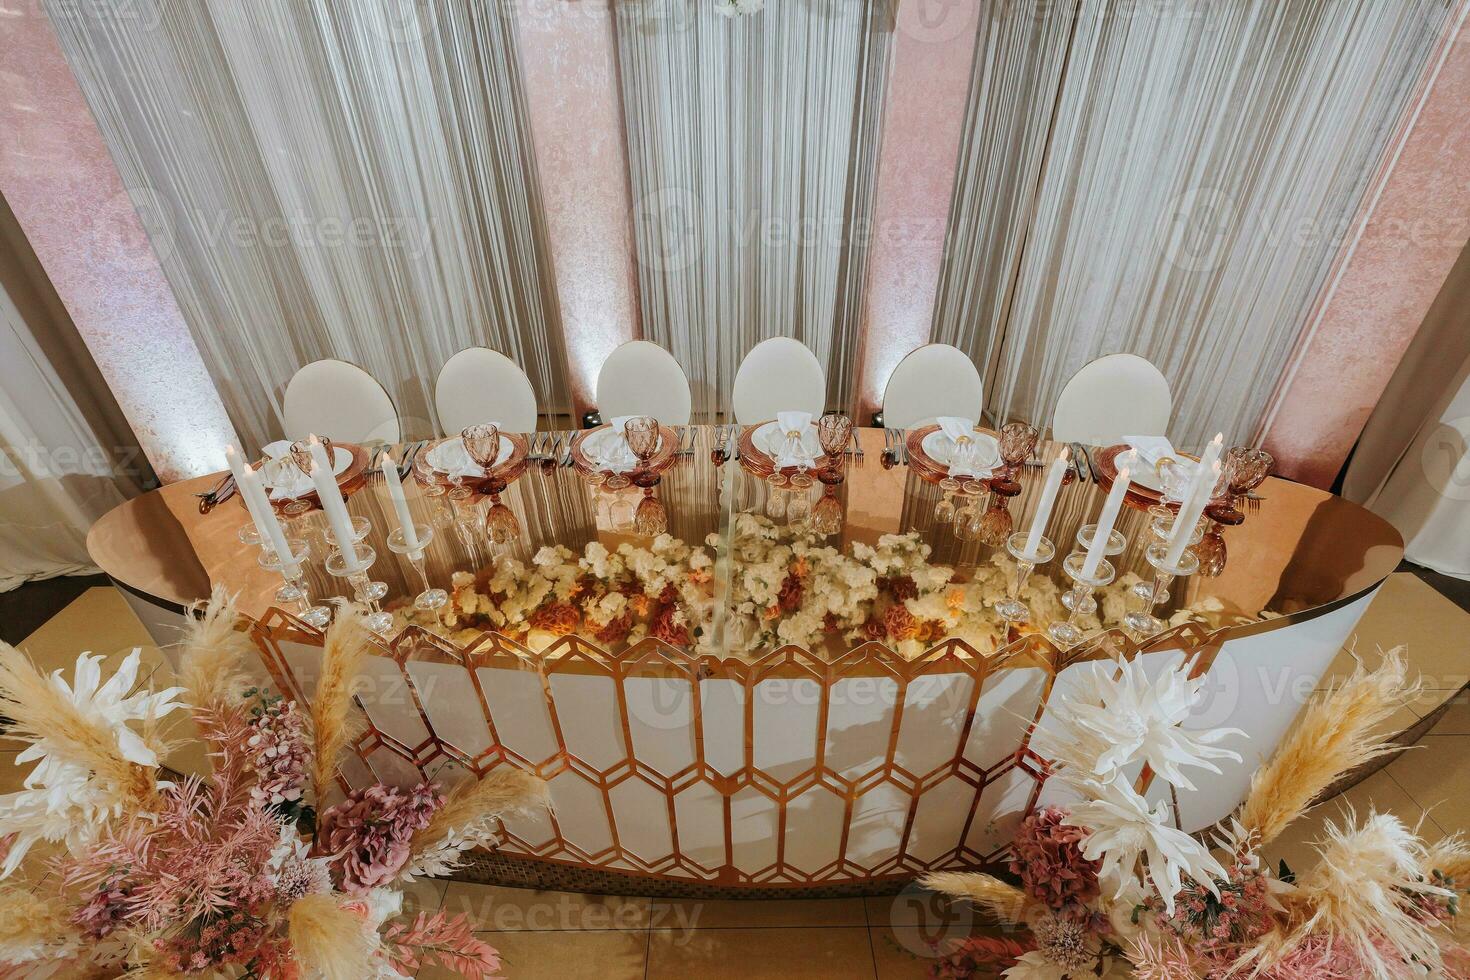 Presidium of the bride and groom at the wedding. Everything is almost ready for the wedding celebration. A wedding banquet, many flowers, golden colors, a rich and refined wedding photo